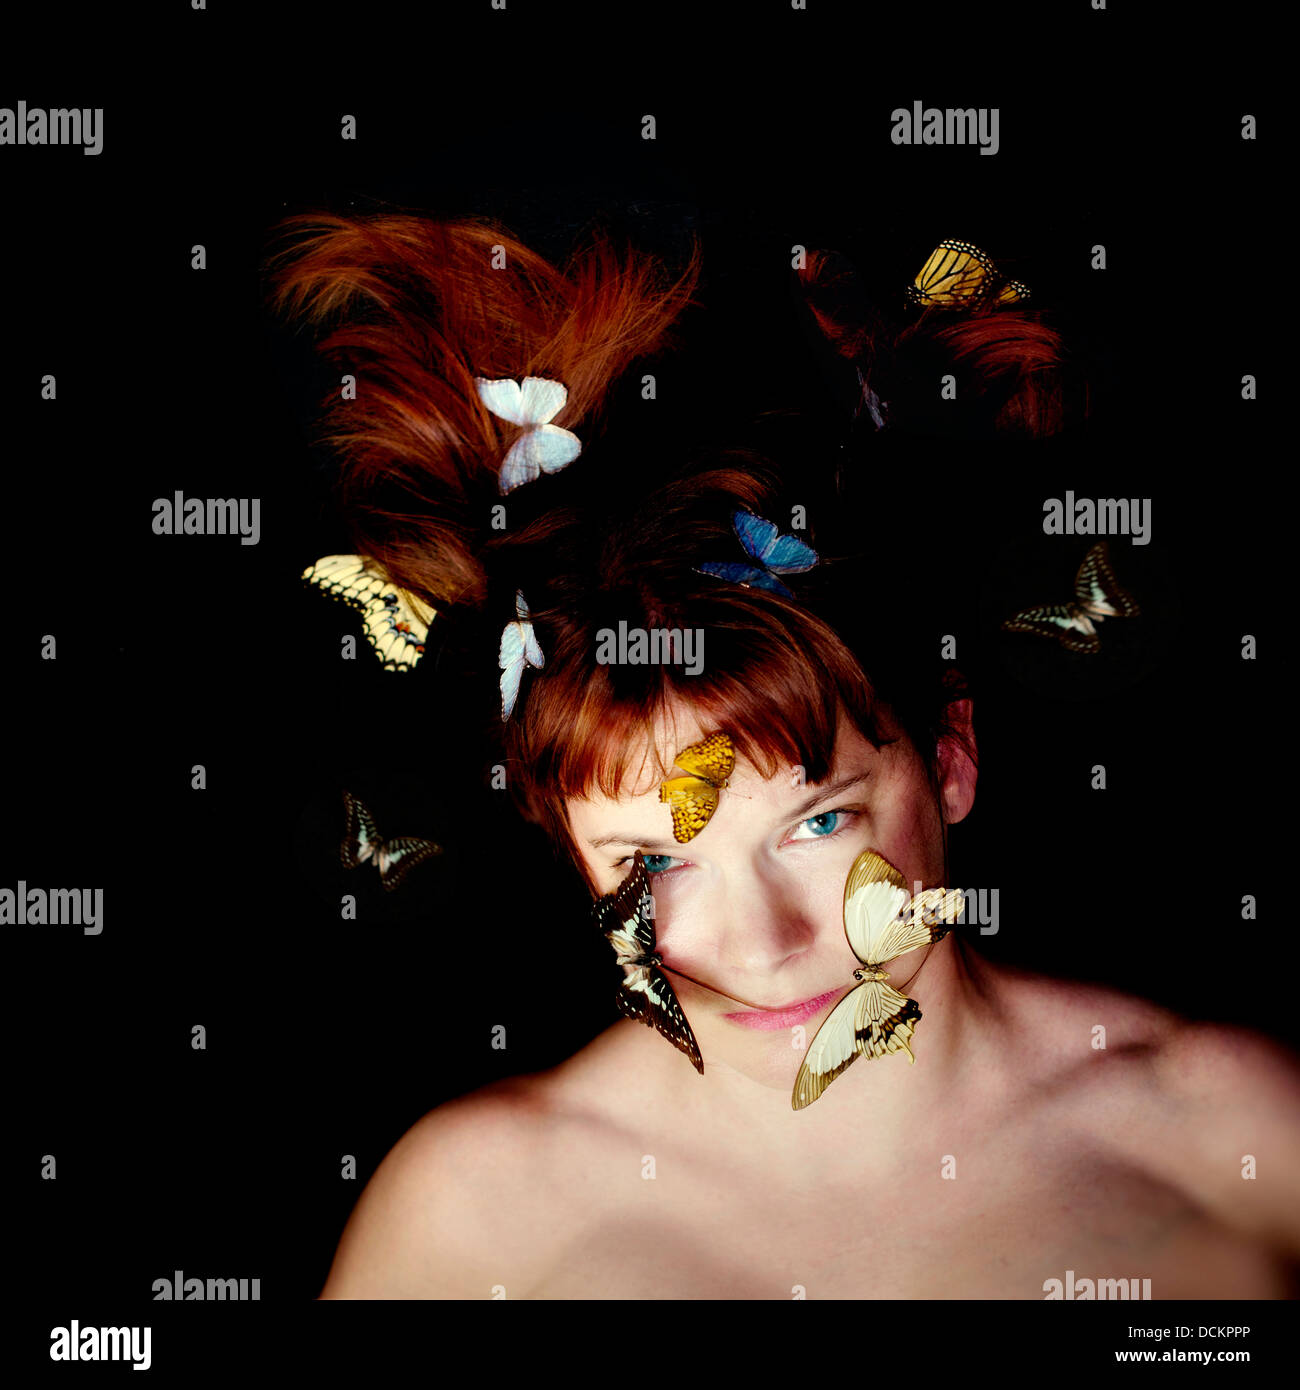 Red haired woman with butterflies on her face and in her hair. Stock Photo